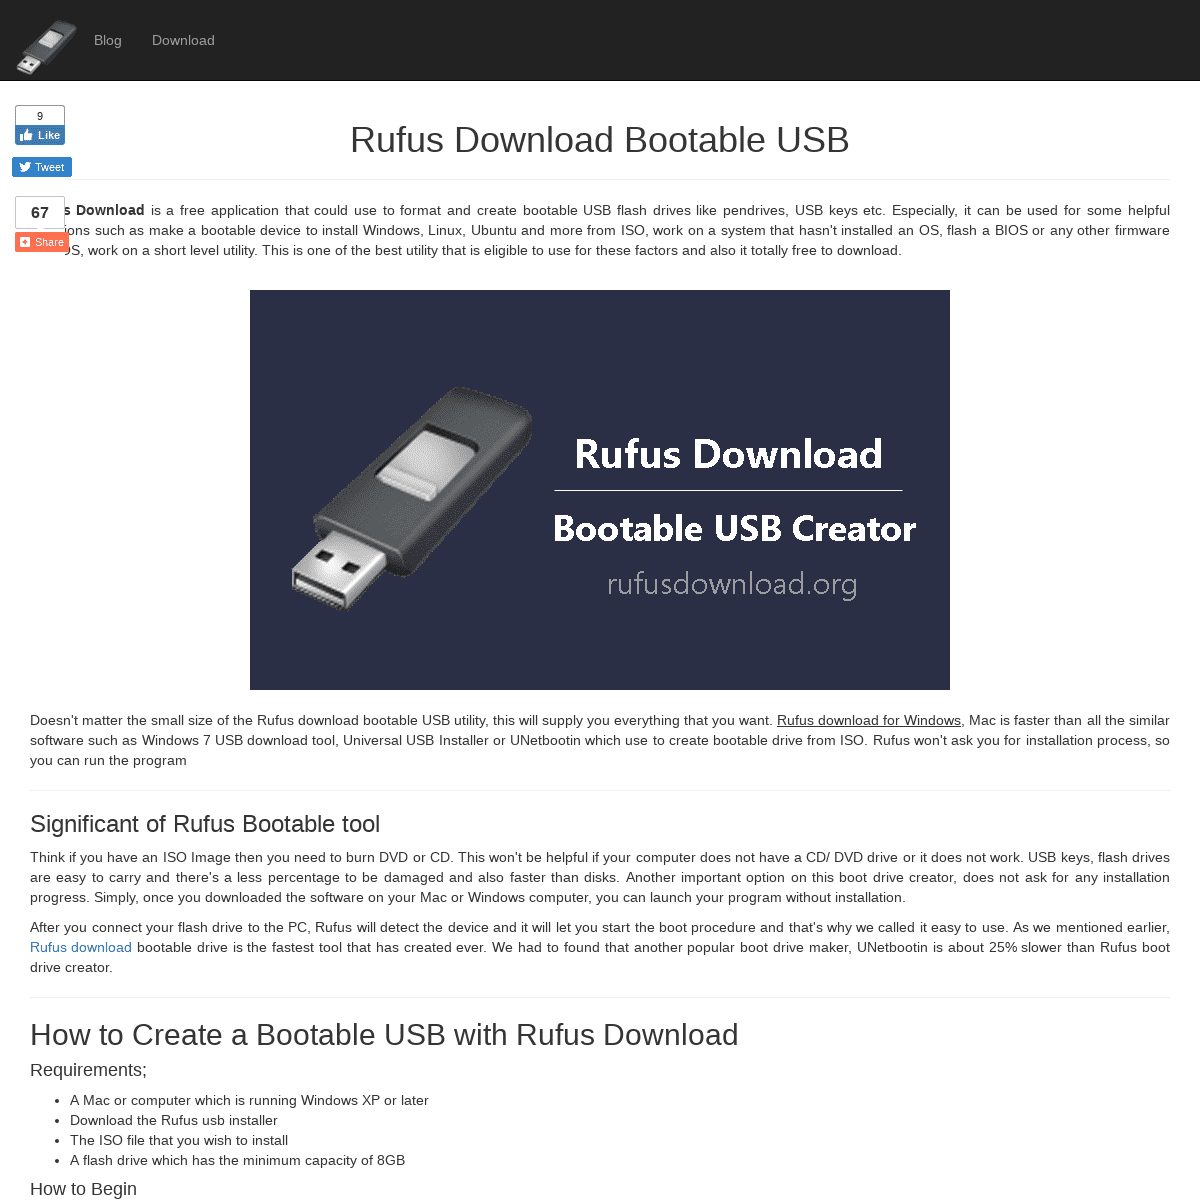 Rufus Download - create bootable USB drives easily